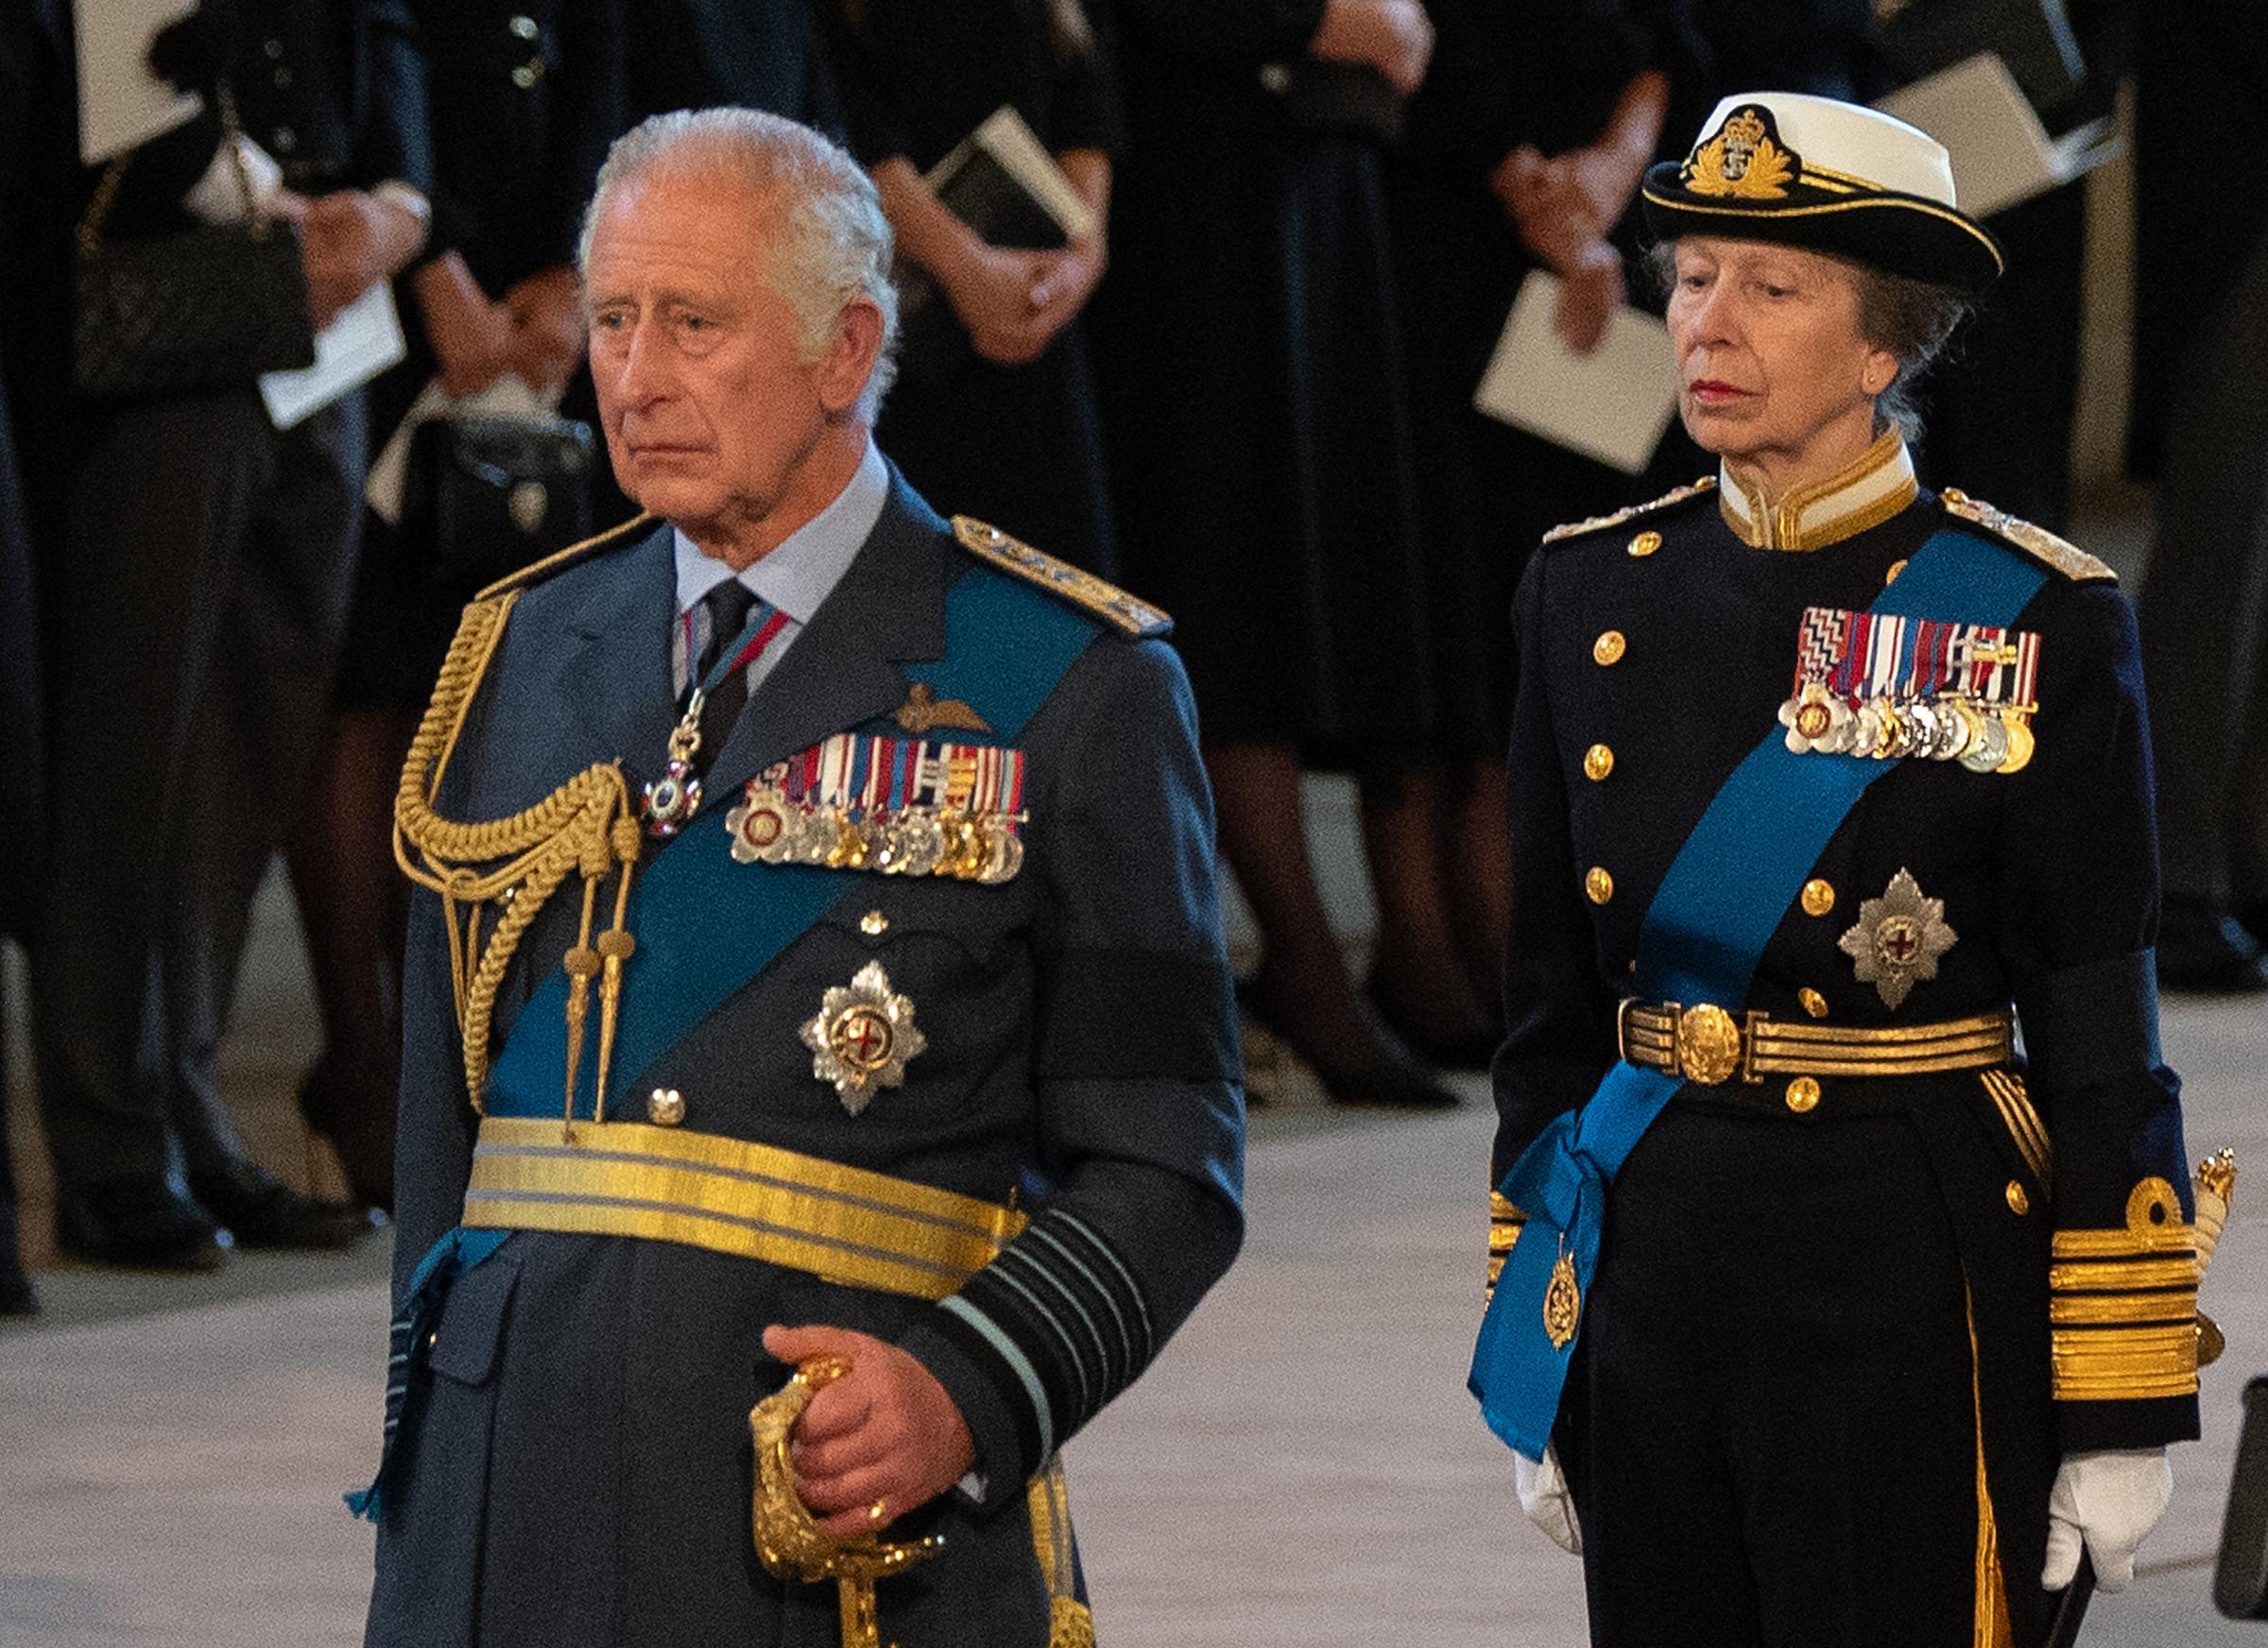 King Charles III and the Princess Royal in front of the coffin of Queen Elizabeth as it lies on the catafalque in Westminster Hall, London, where it will lie in state ahead of her funeral on Monday. Photo credit: David Ramos/PA Wire.